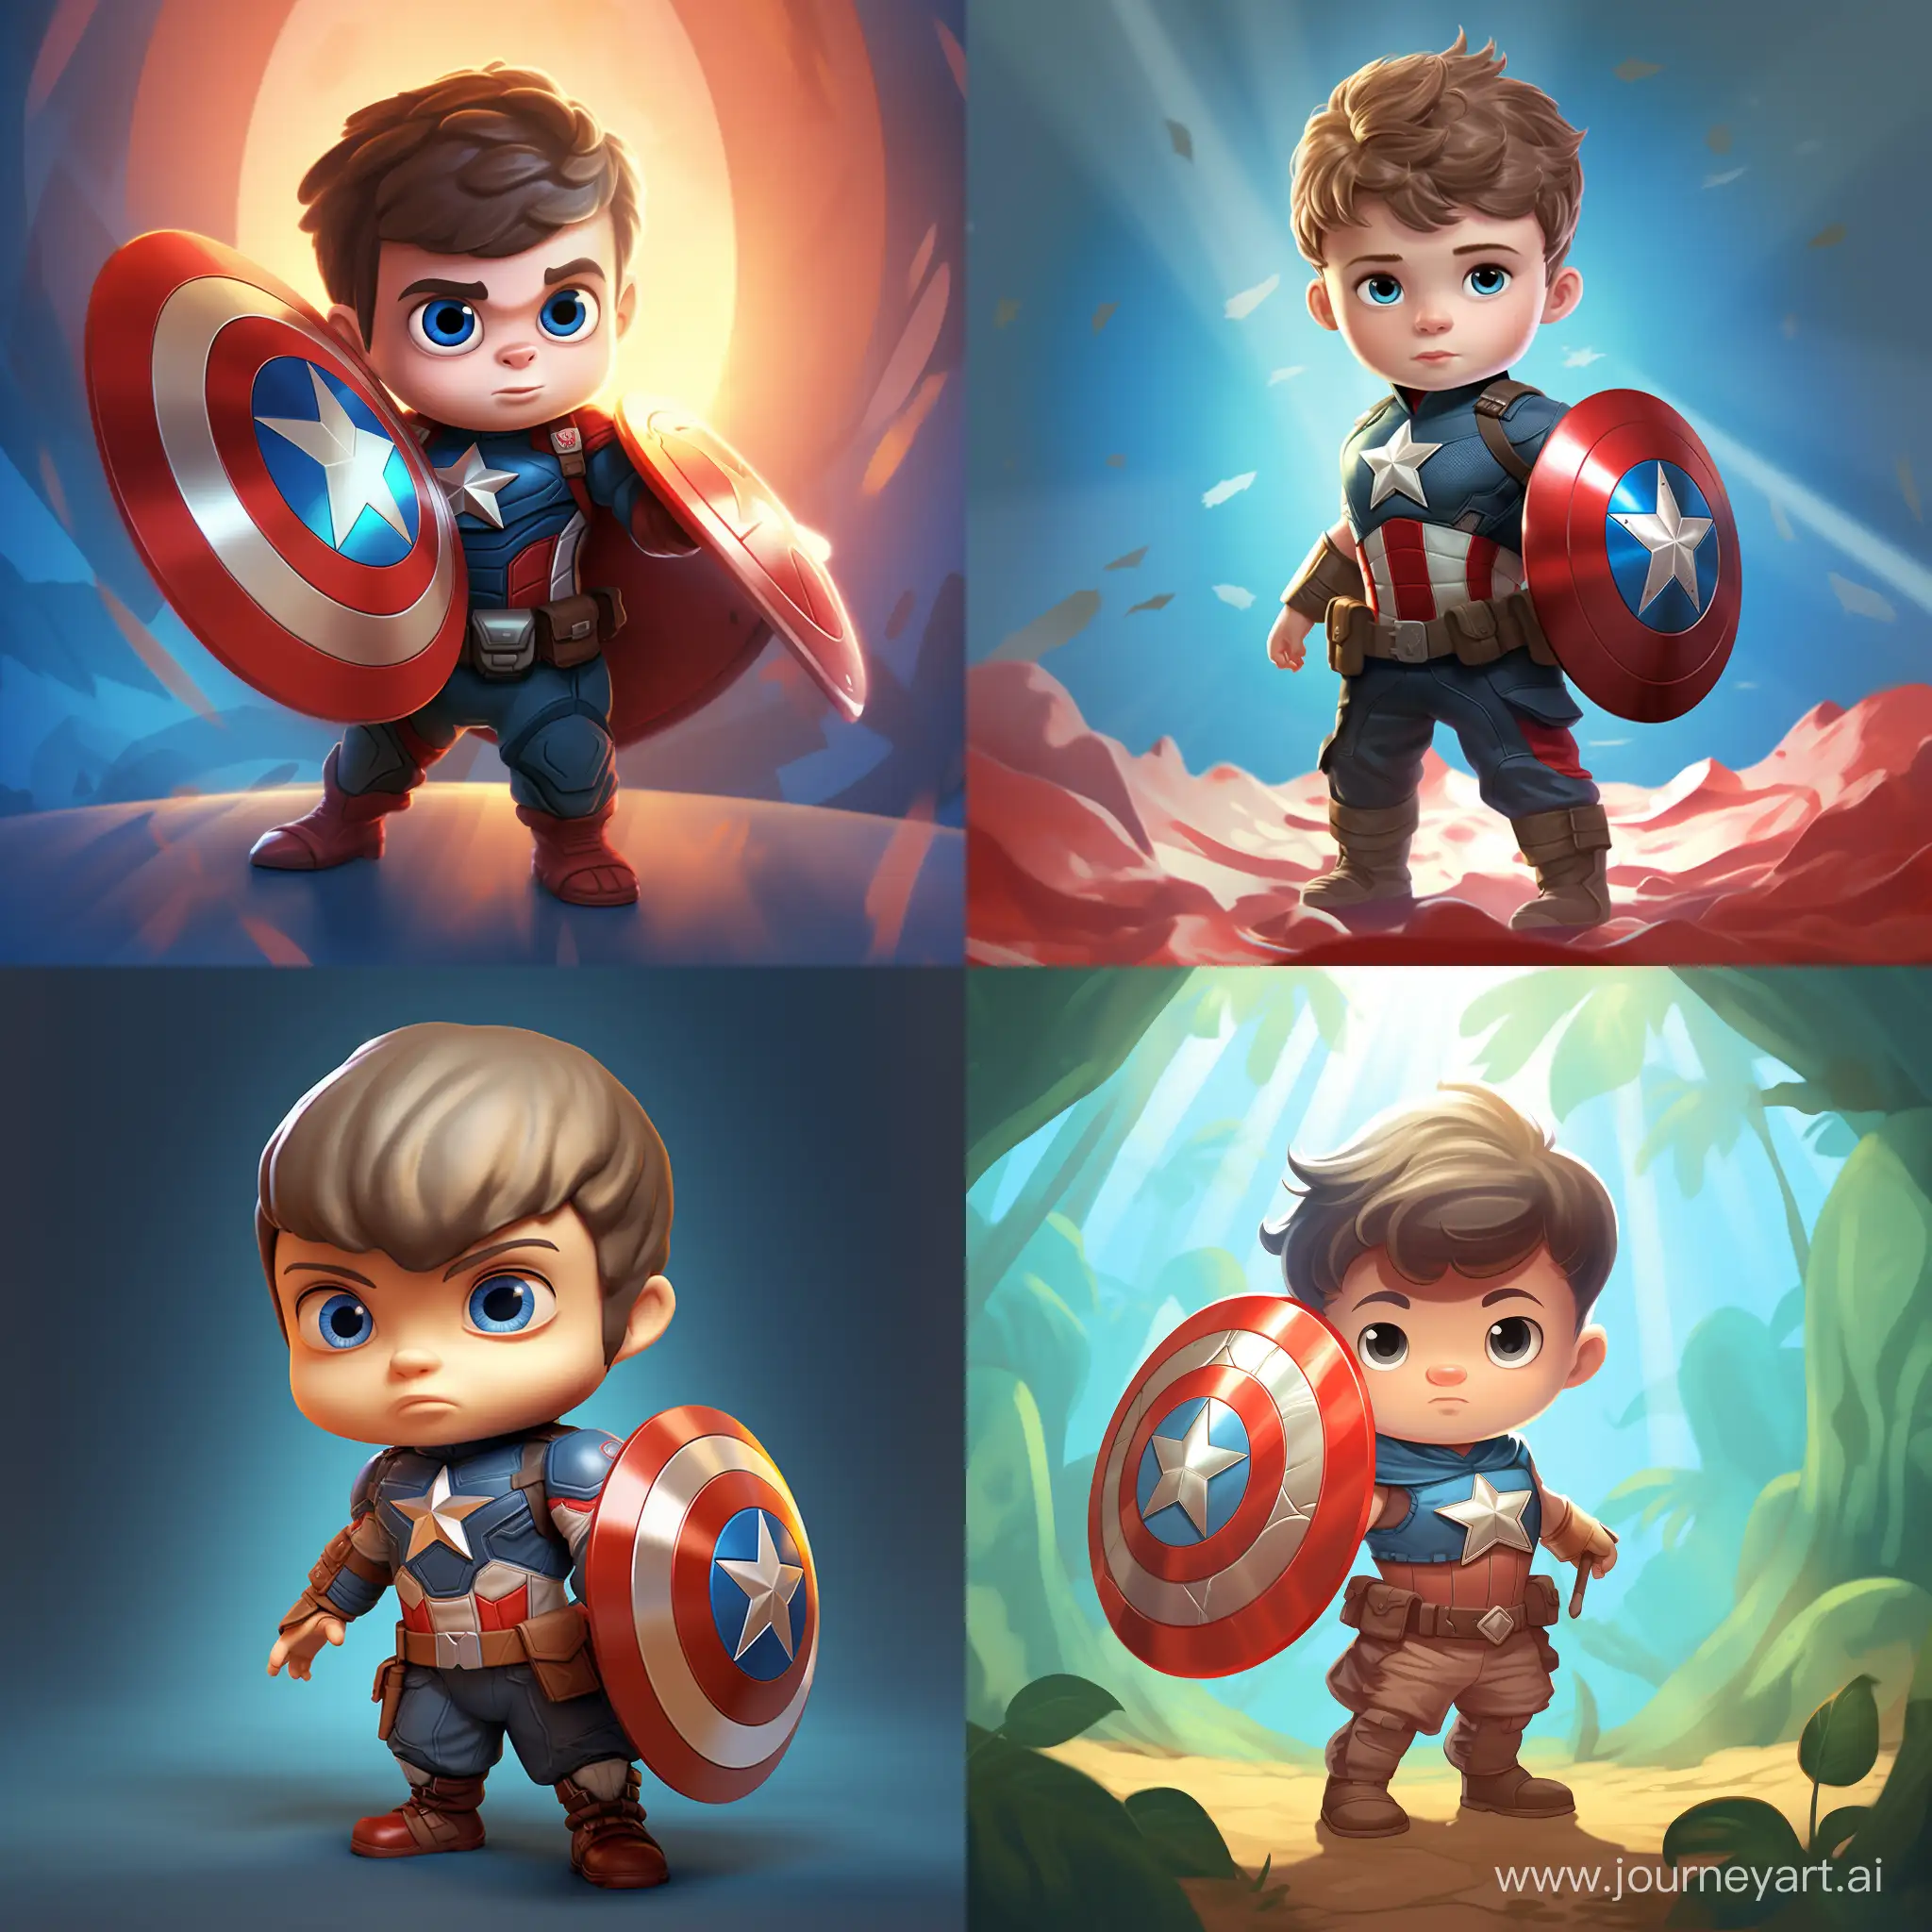 Adorable-Baby-Captain-America-Defends-in-Cartoon-Style-Illustration